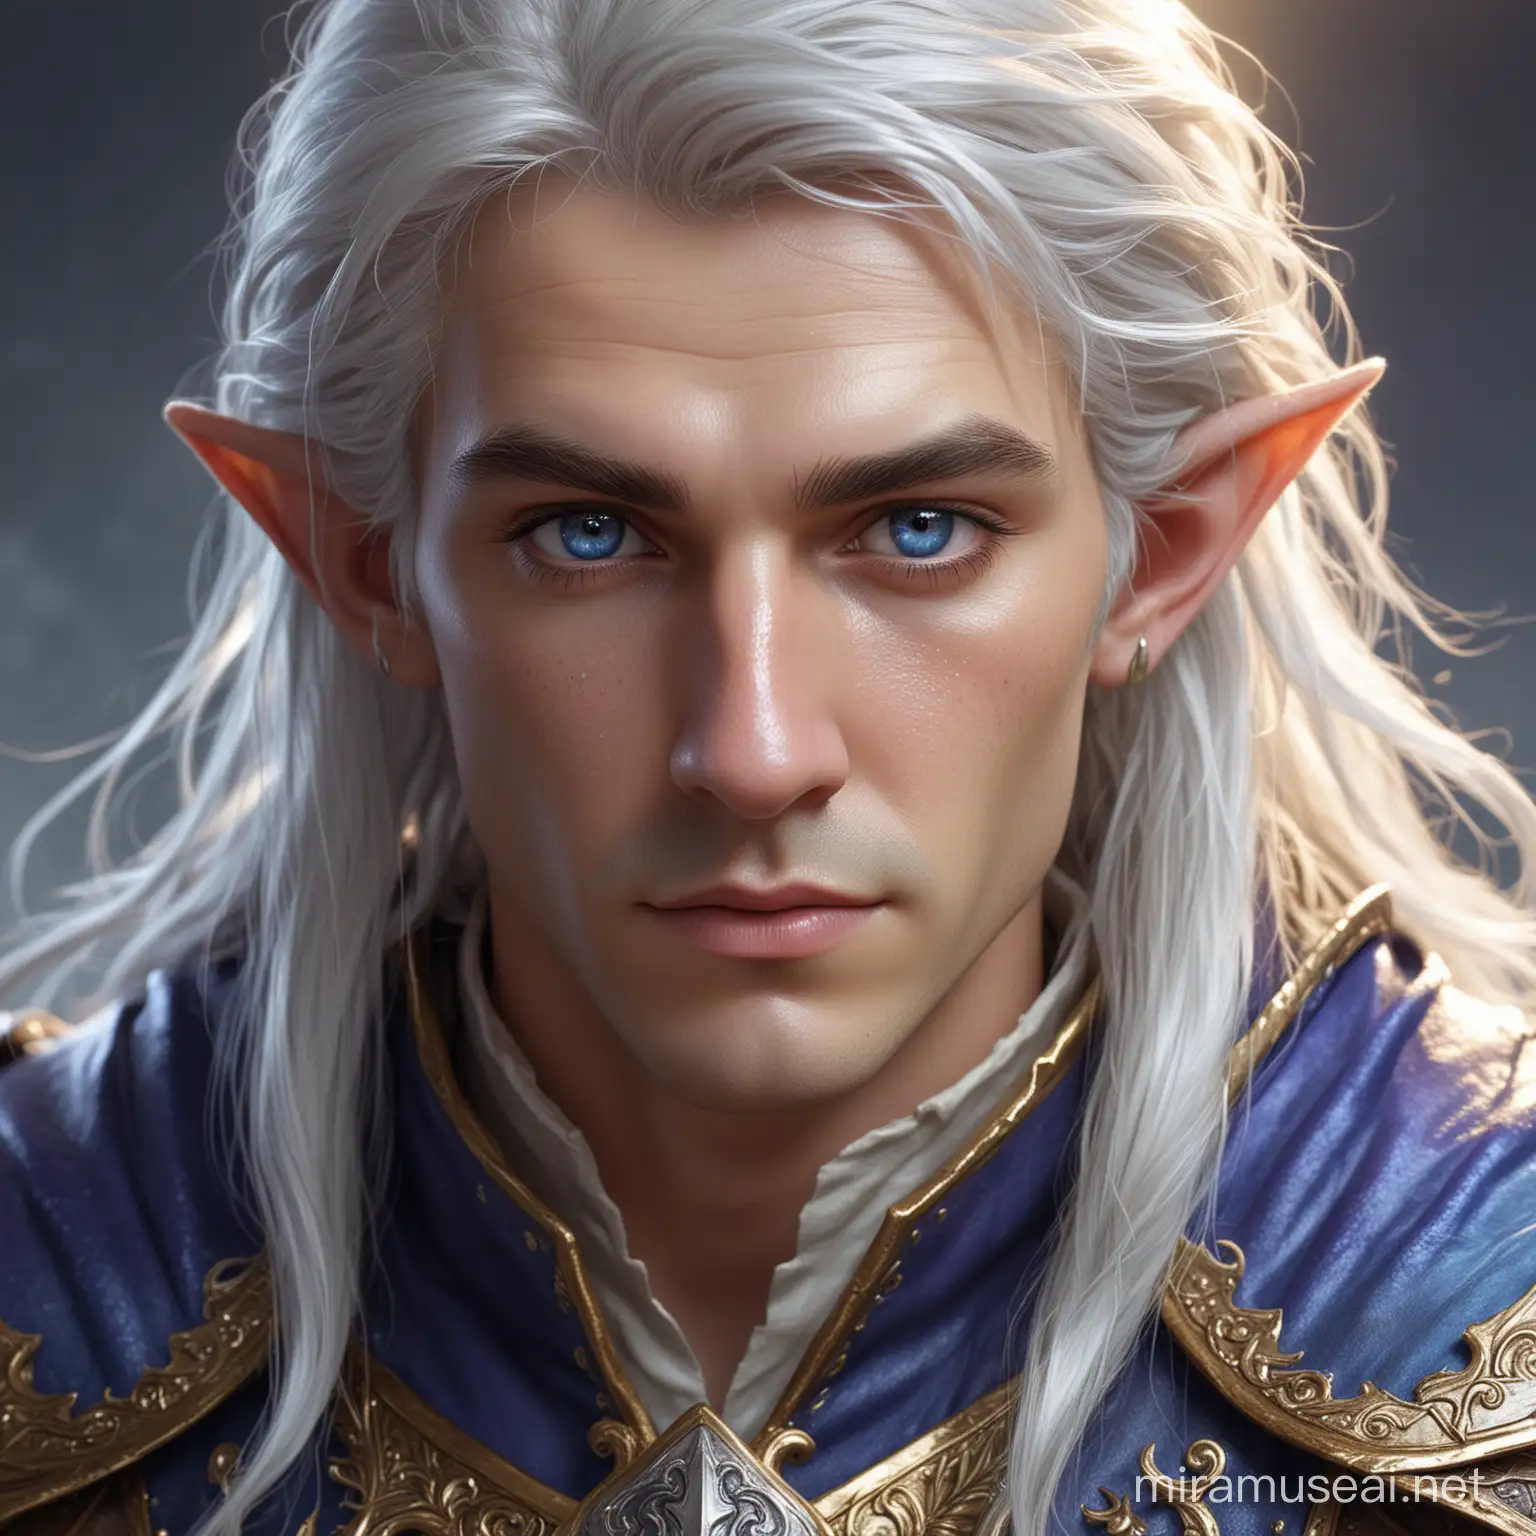 Elven Bard with Alabaster Skin and BlueGold Speckled Eyes in Leather Armor